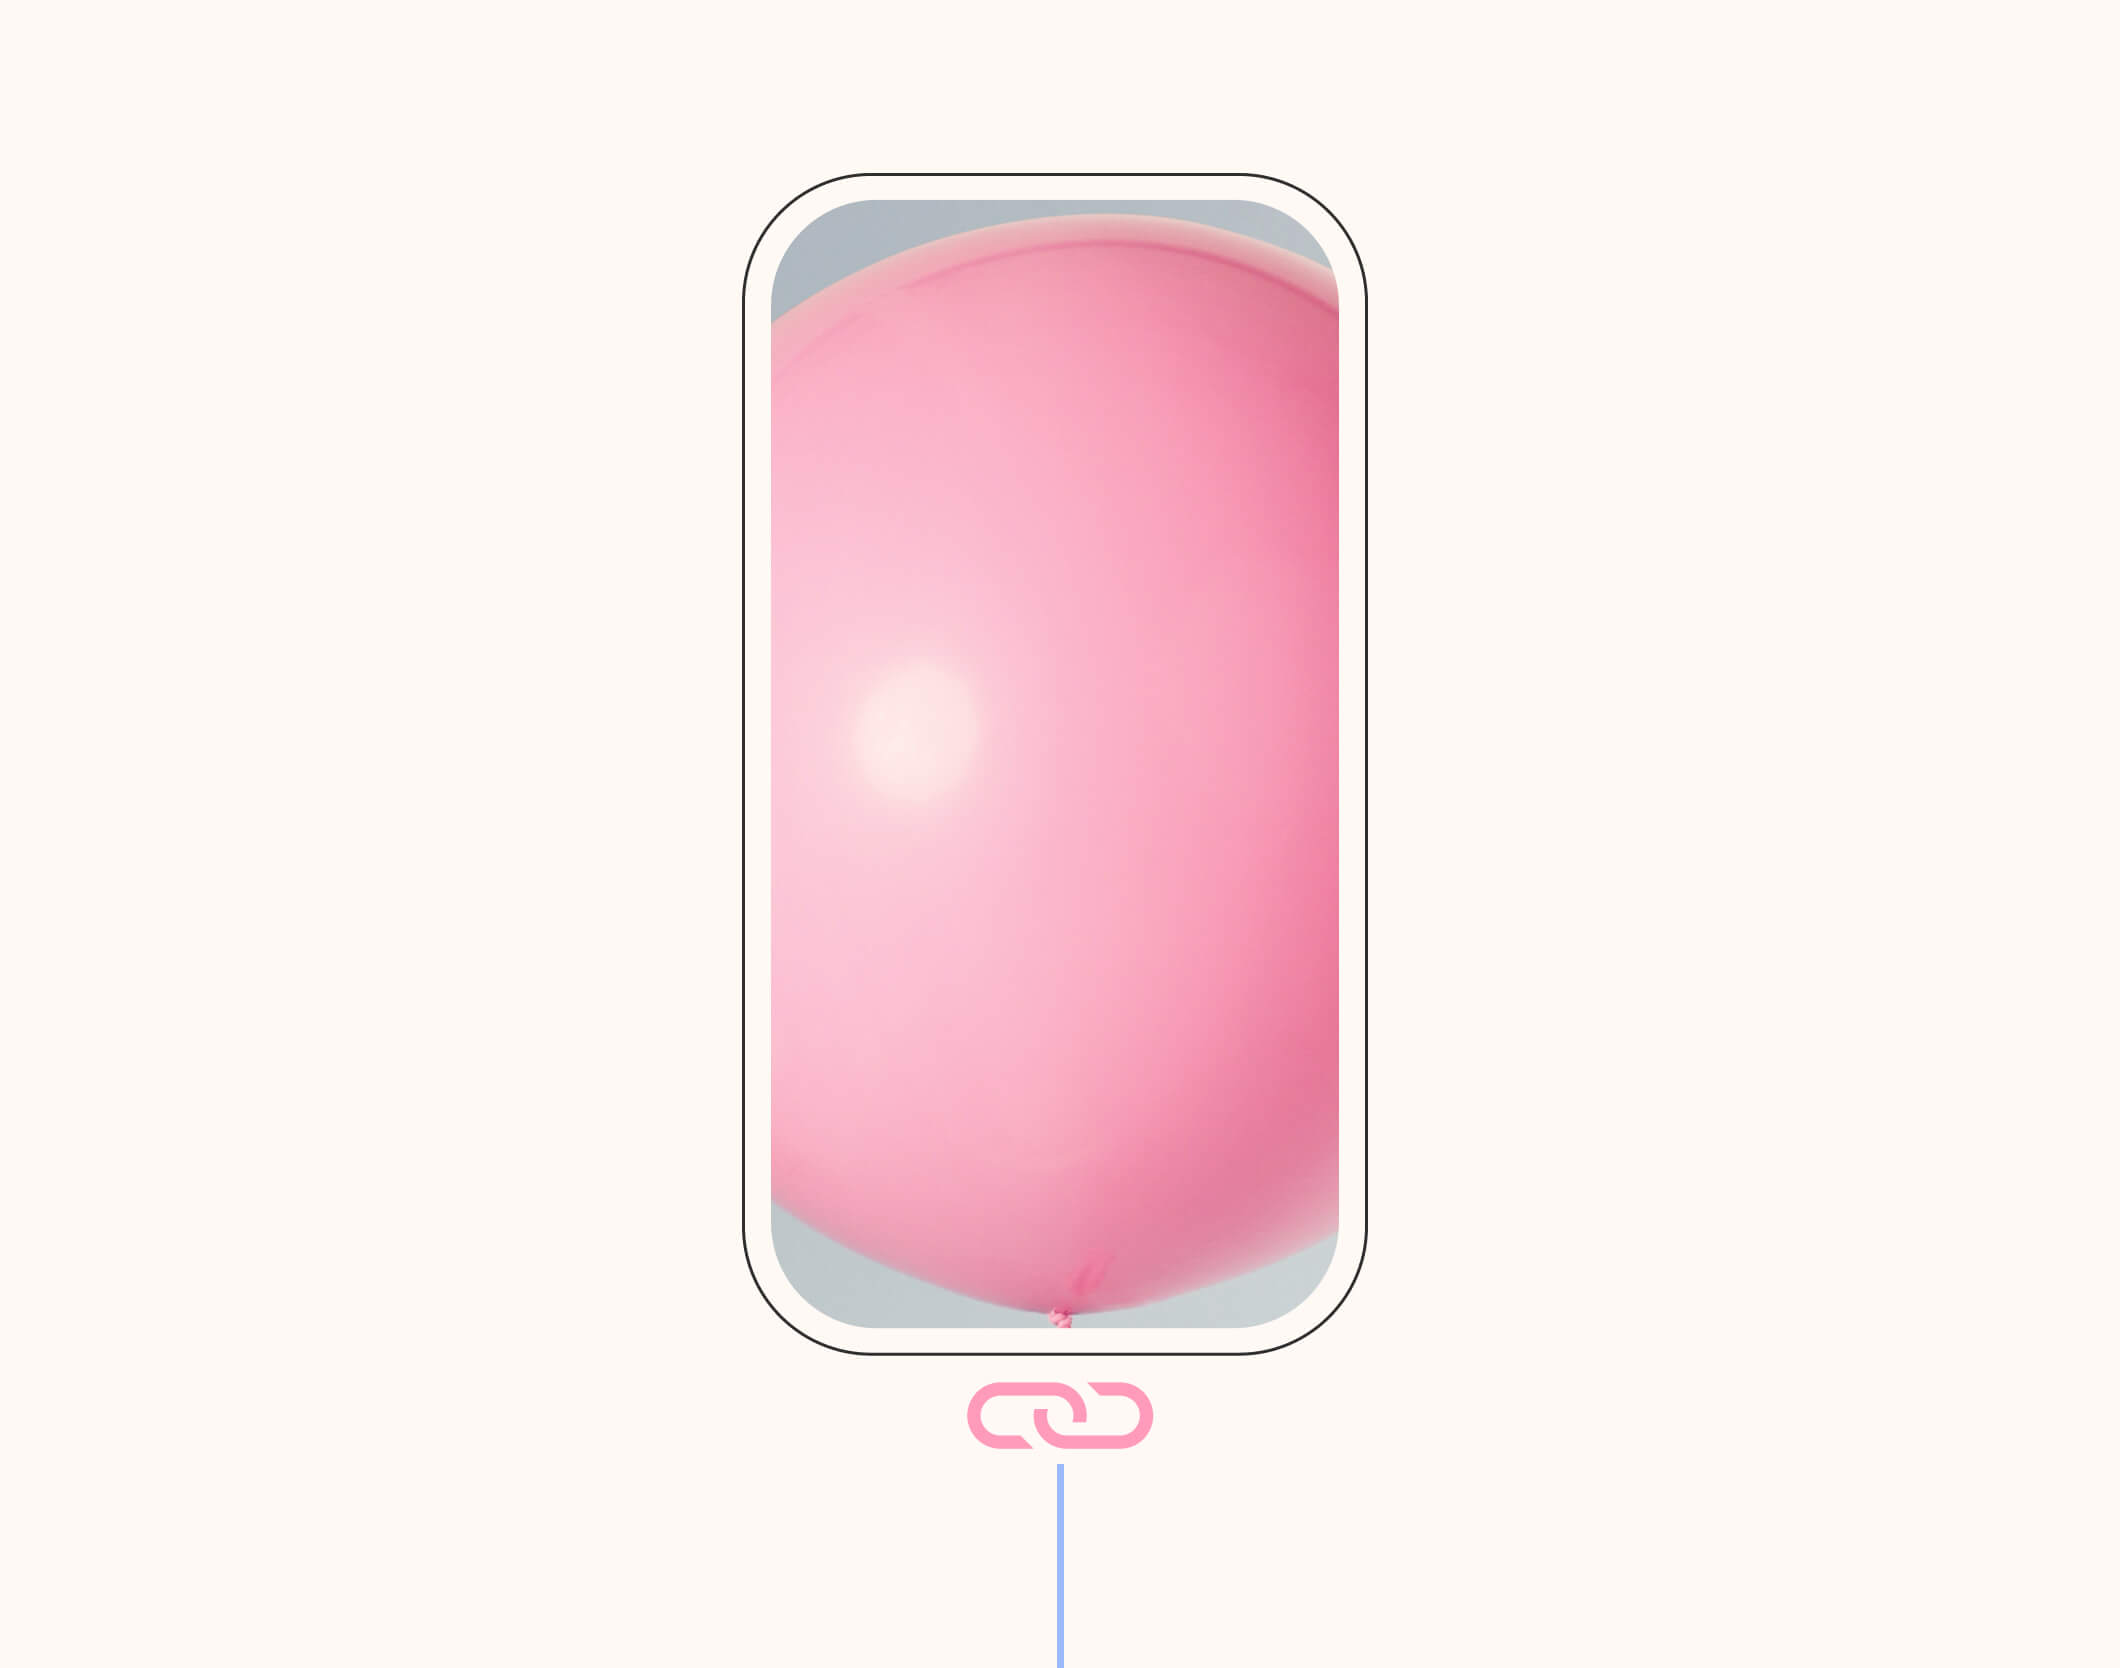 An illustration of a phone with a balloon and a link.